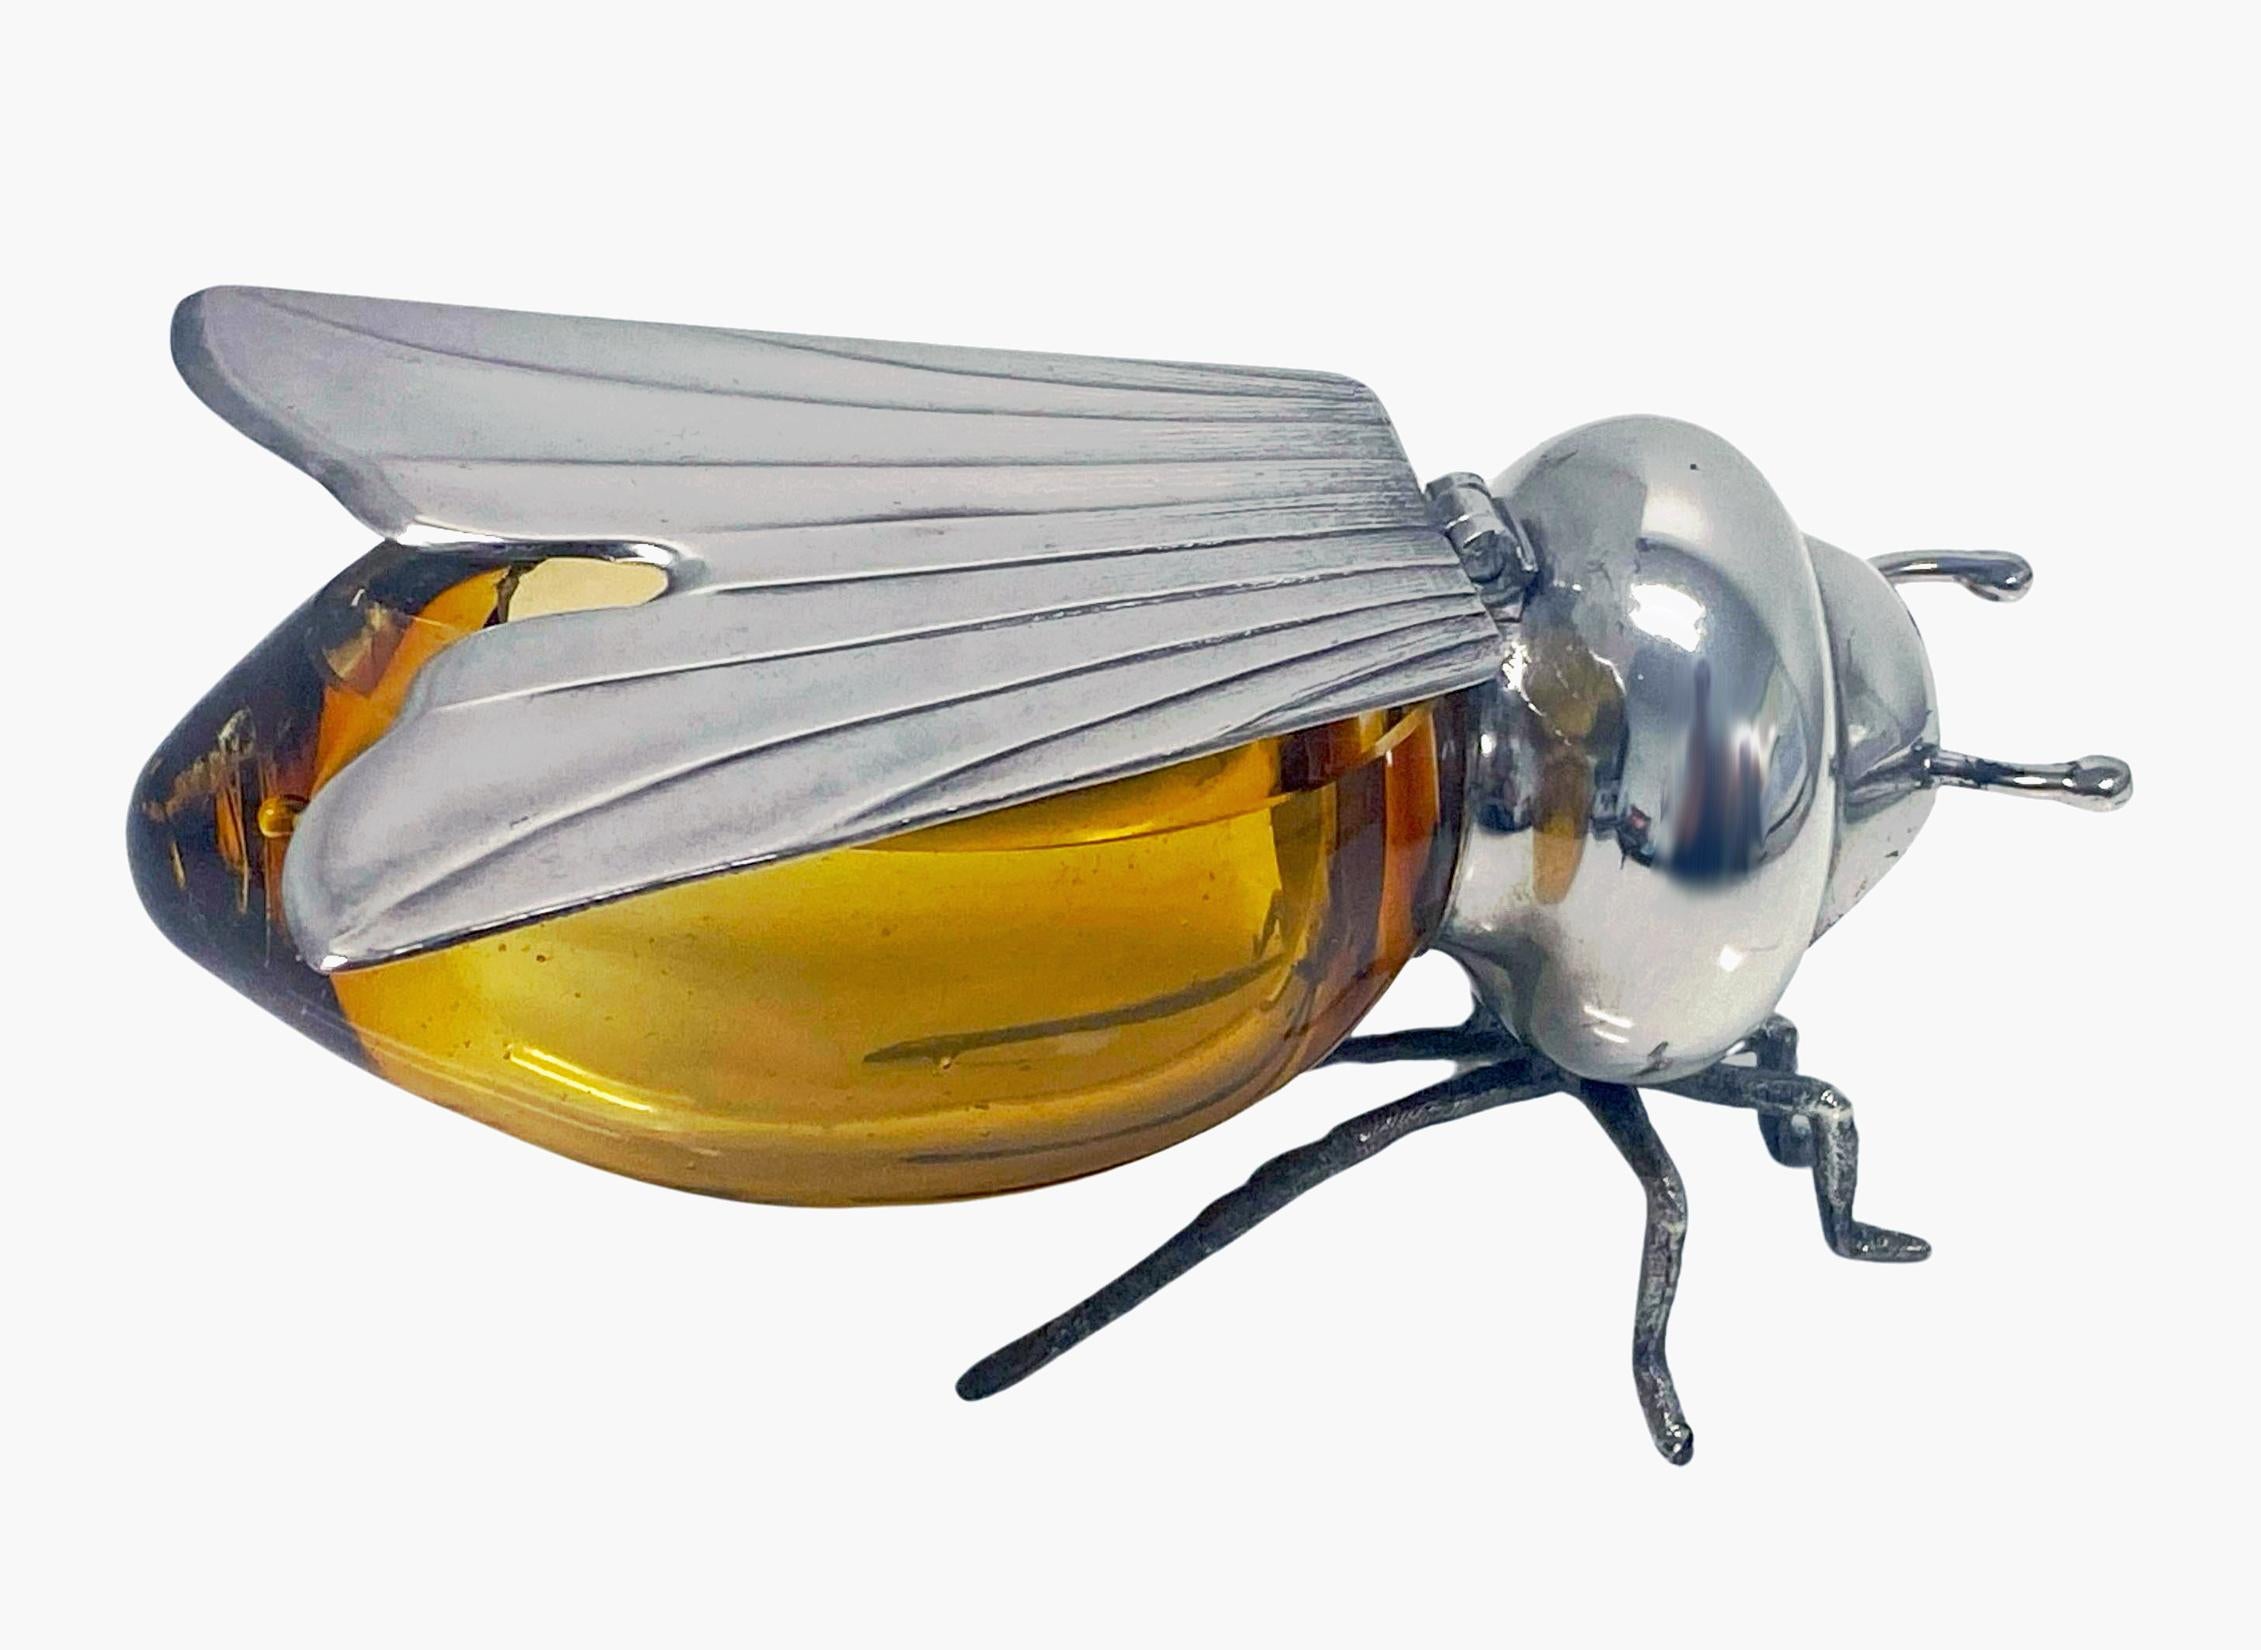 Sterling Silver and amber colour glass figural Bee Honey Pot, Camusso Peru C.1930. The honey pot with hinged wings and amber glass body conforming in shape, protruding antennae on six realistically textured legs attached to the thorax. Measures: 3.5